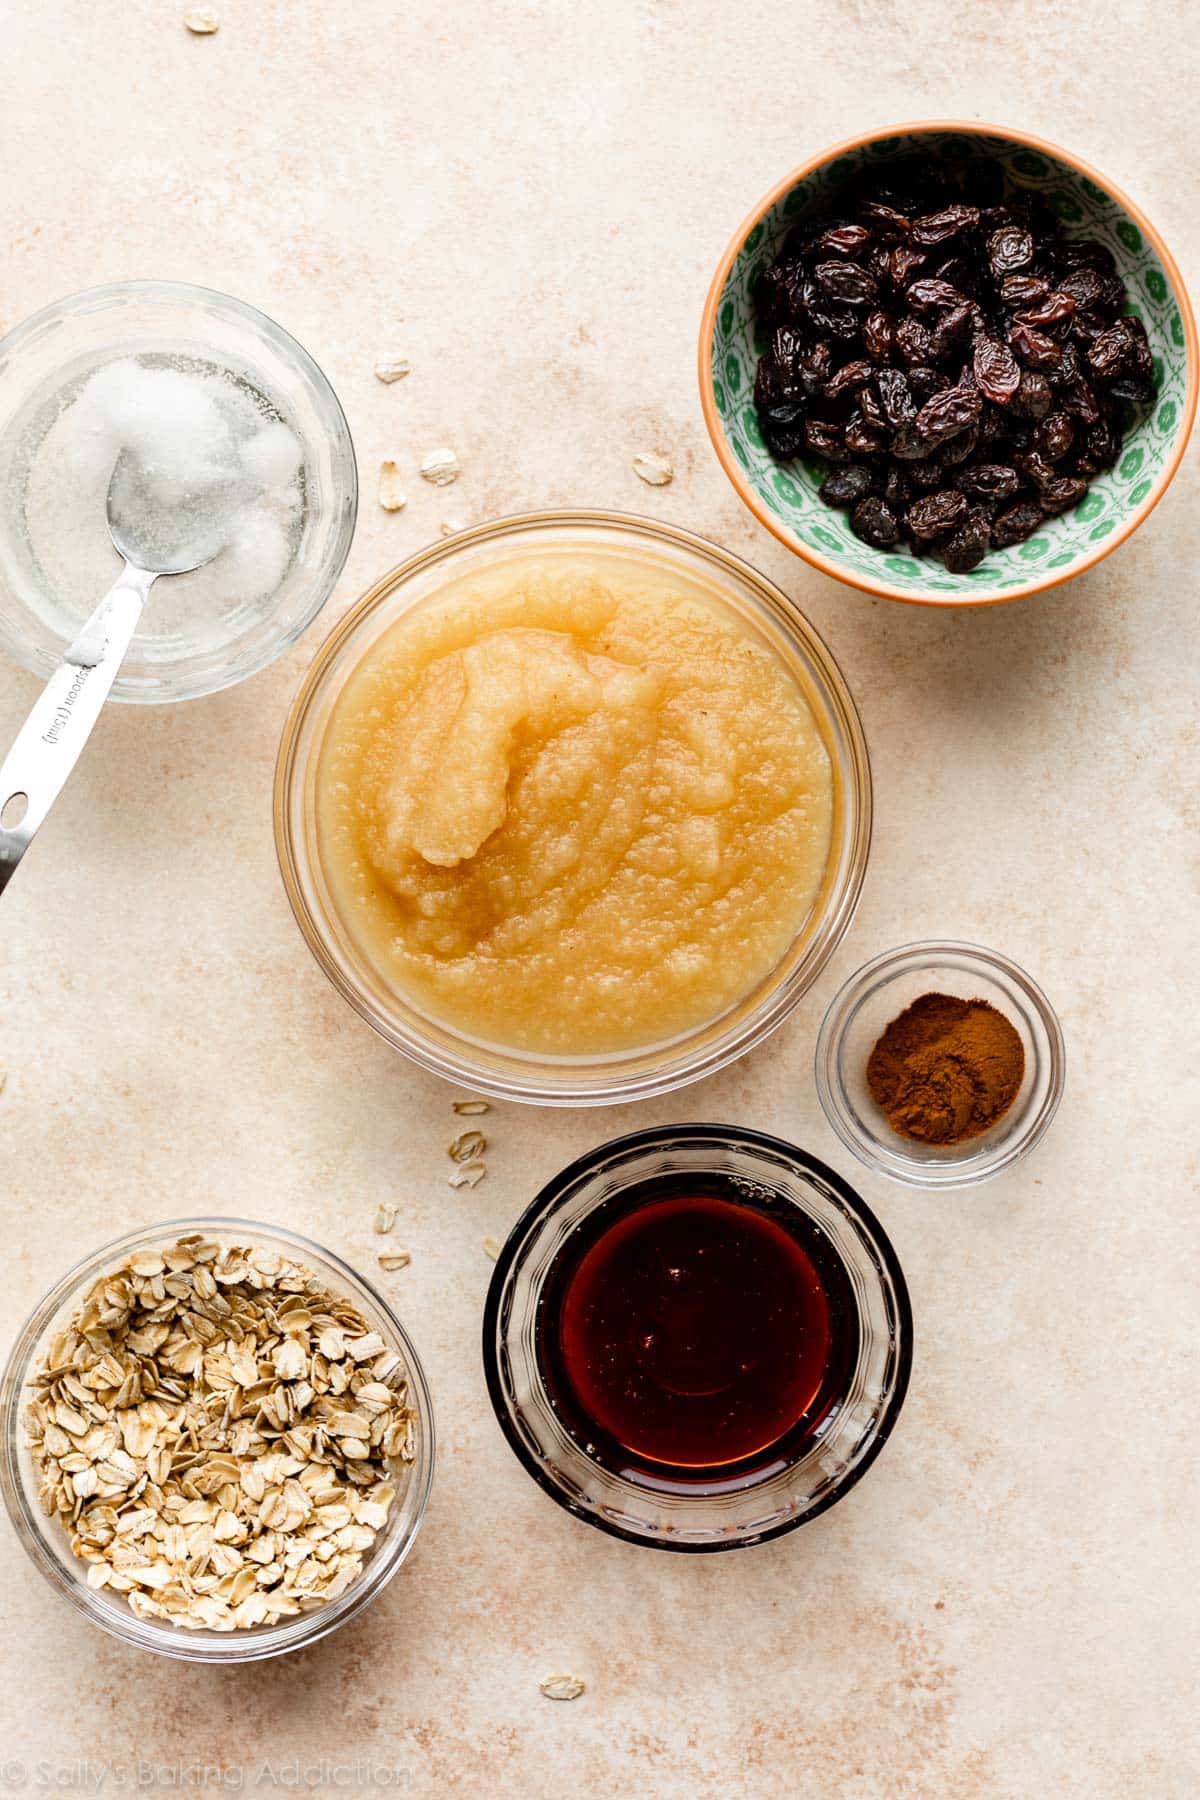 applesauce and other muffin ingredients shown in bowls